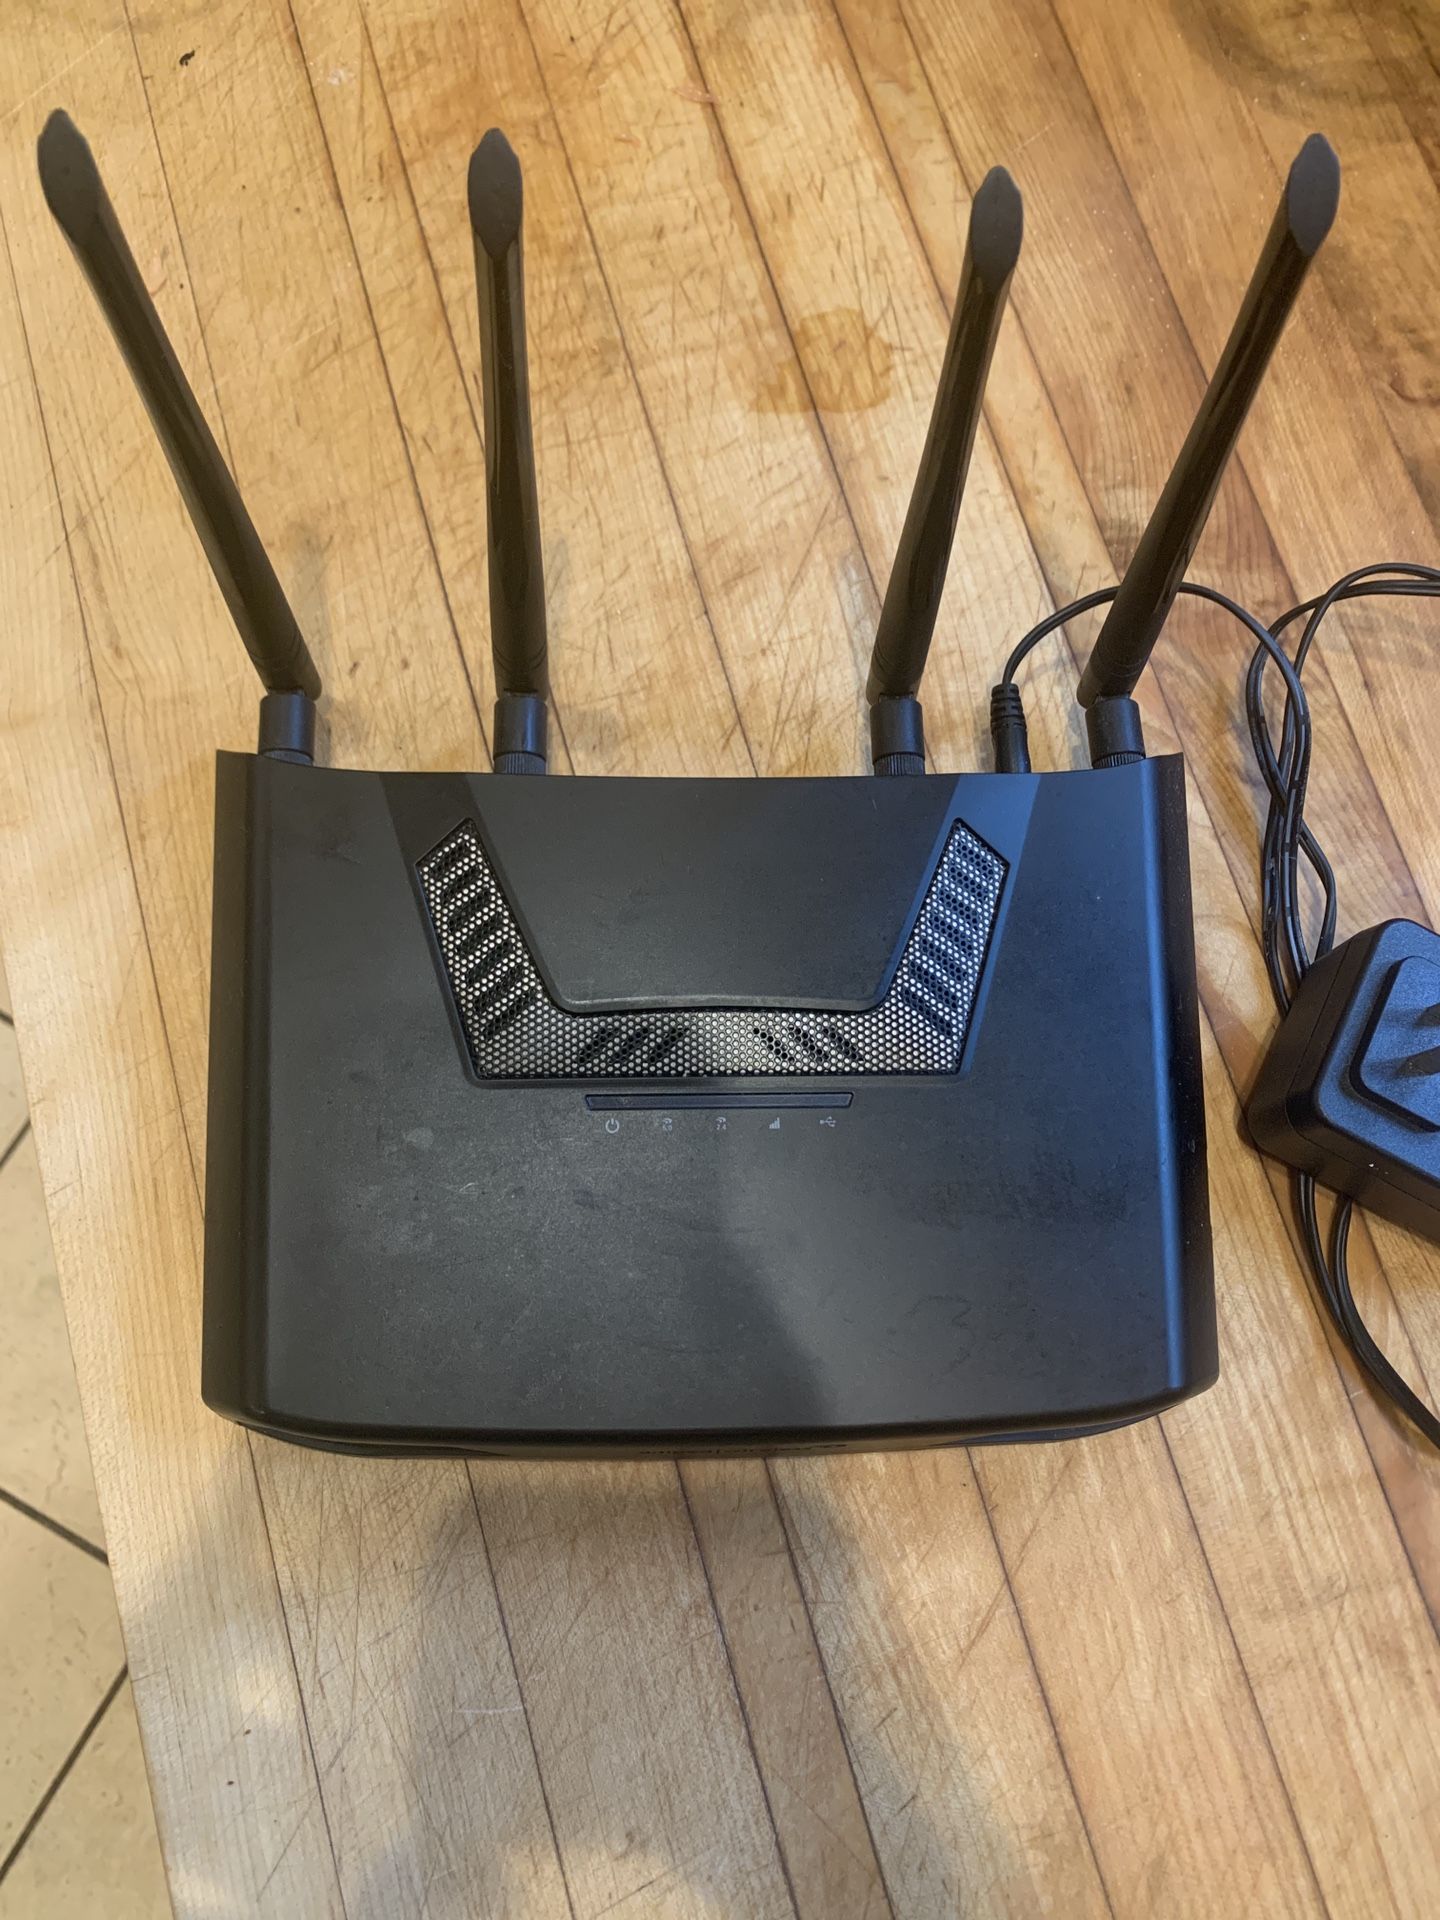 Amped Extender and router